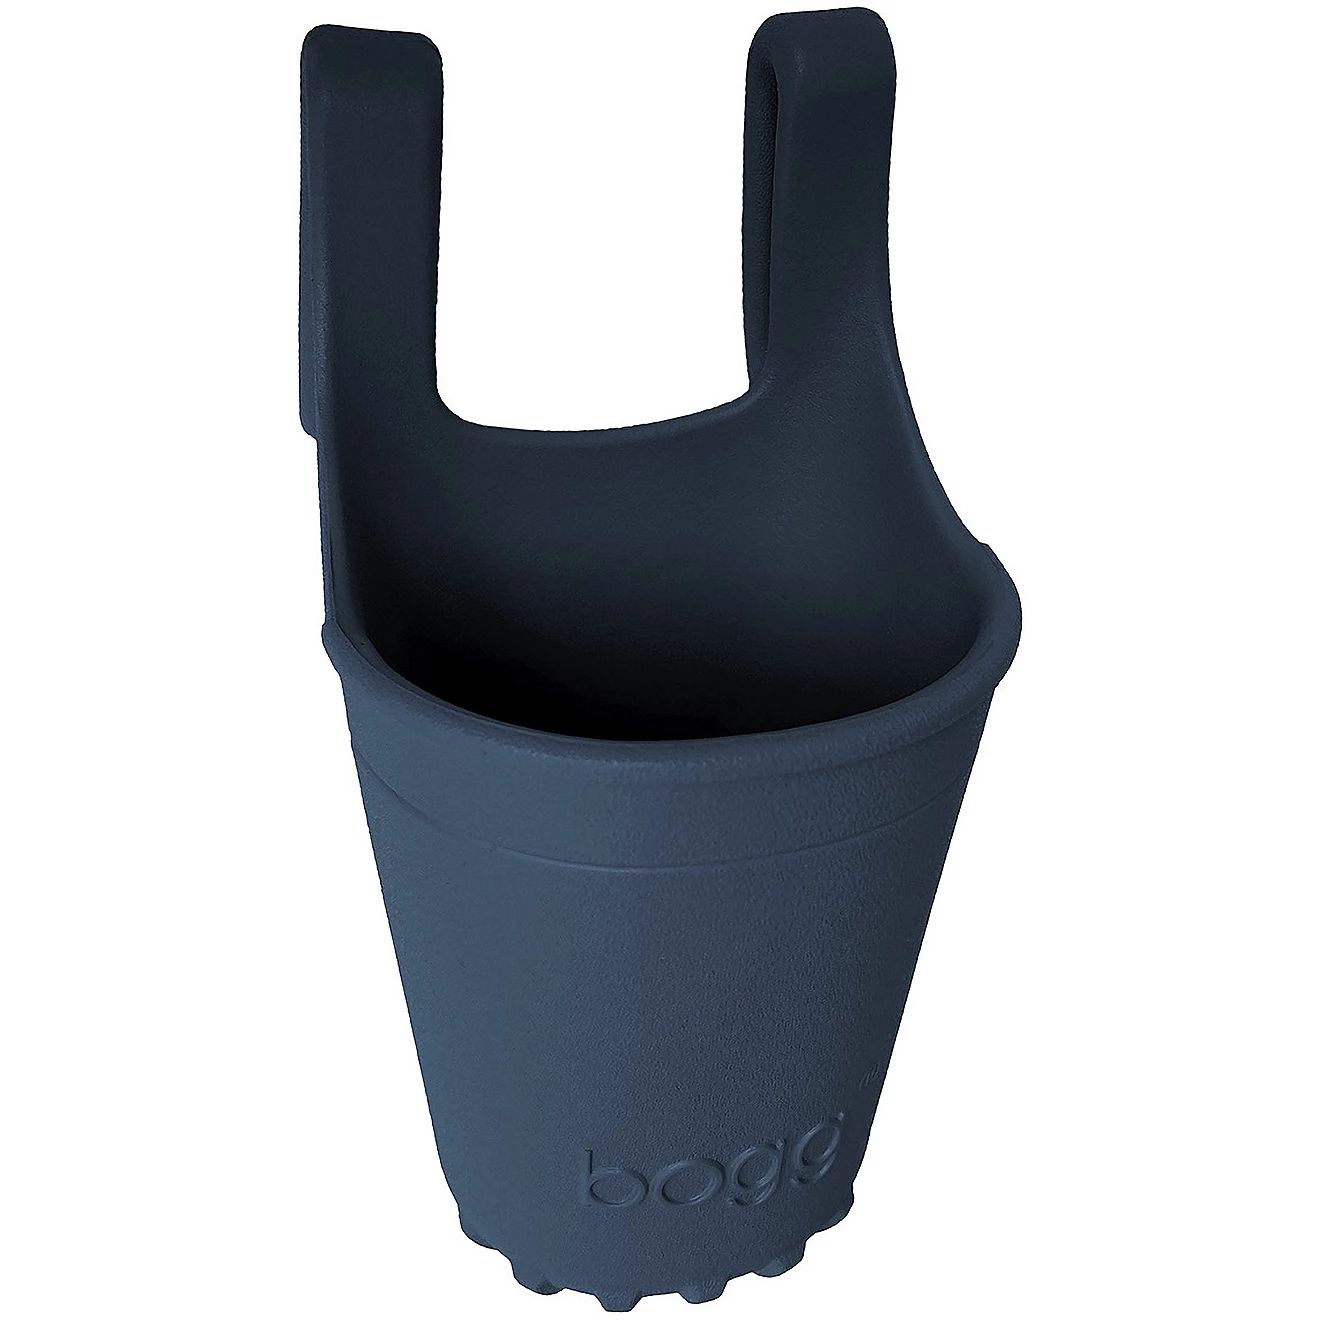 Bogg Bag Bevy Cup Holder | Academy | Academy Sports + Outdoors